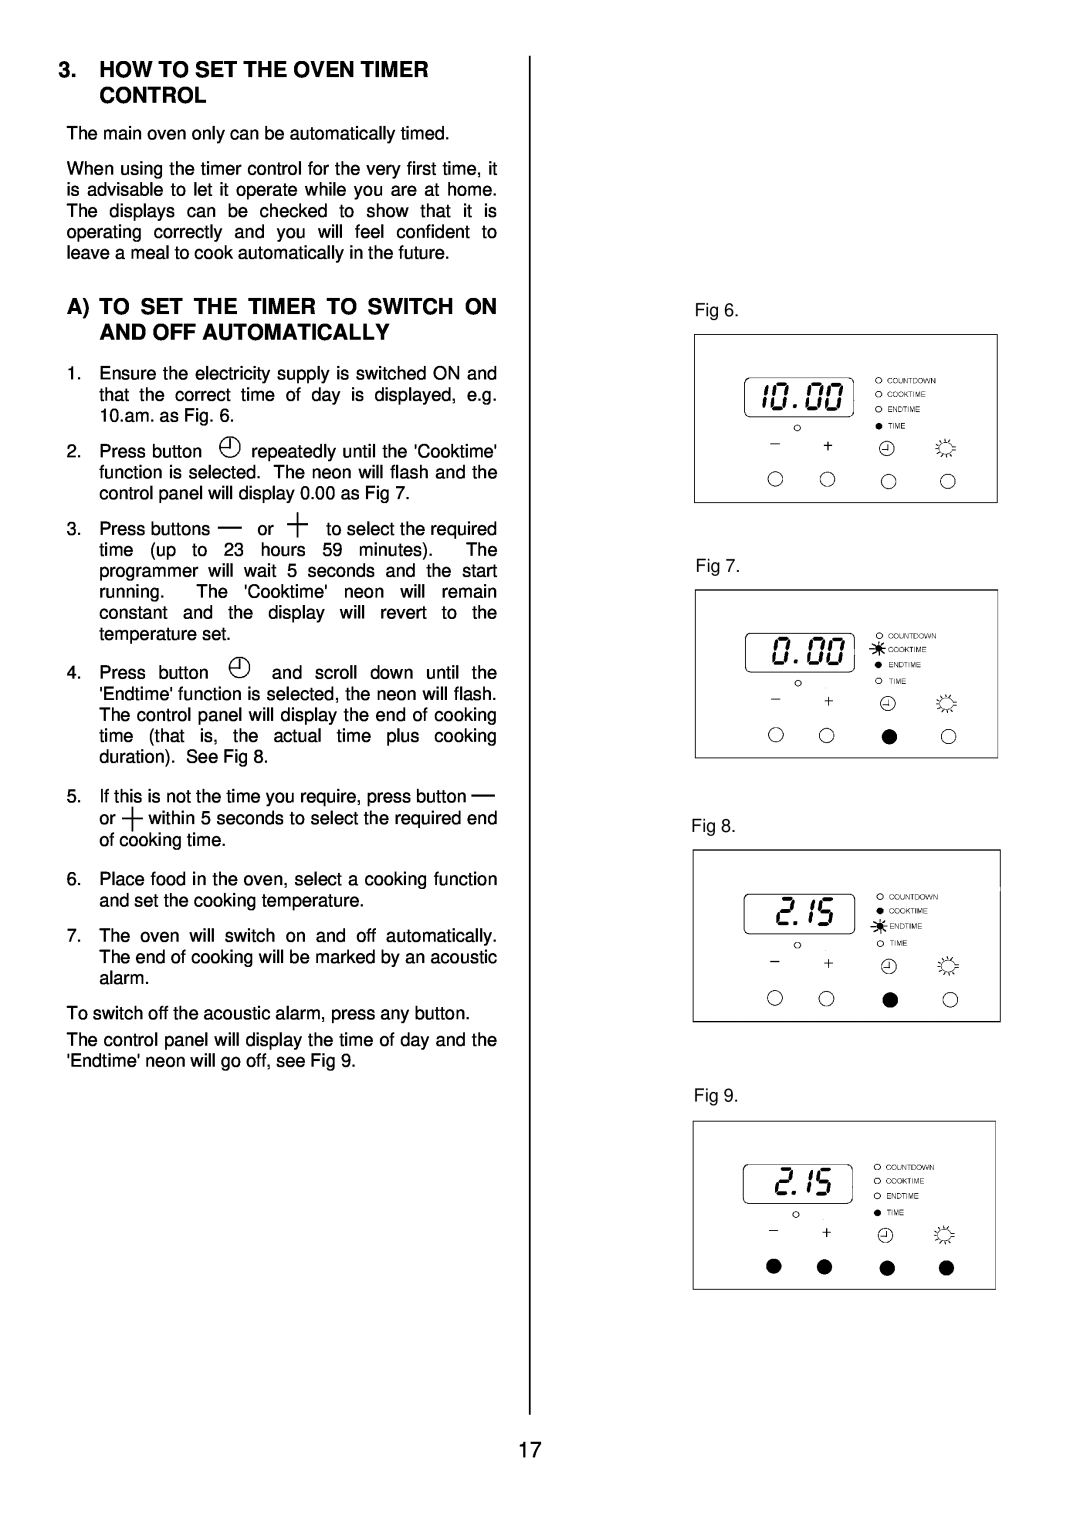 Zanussi ZDQ 895 manual How To Set The Oven Timer Control, A To Set The Timer To Switch On And Off Automatically 